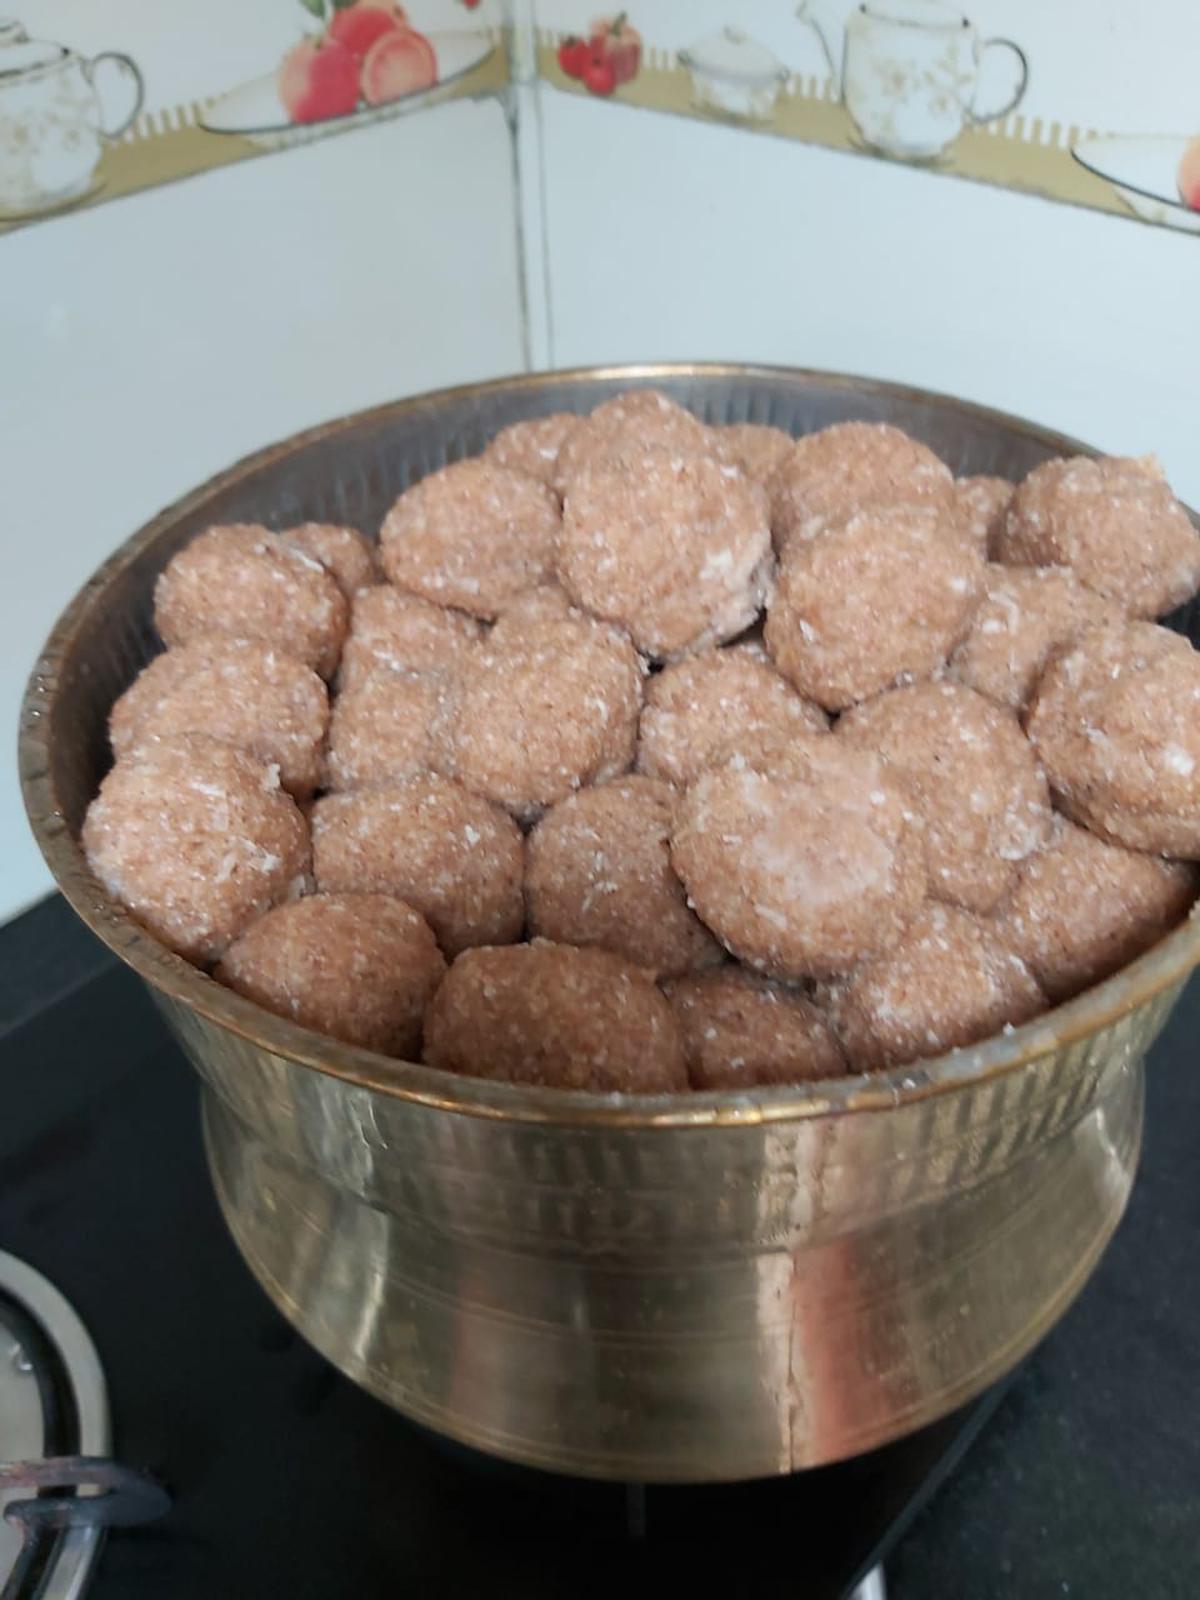 Kalimittu, a snack made with millets at Badaga homes 